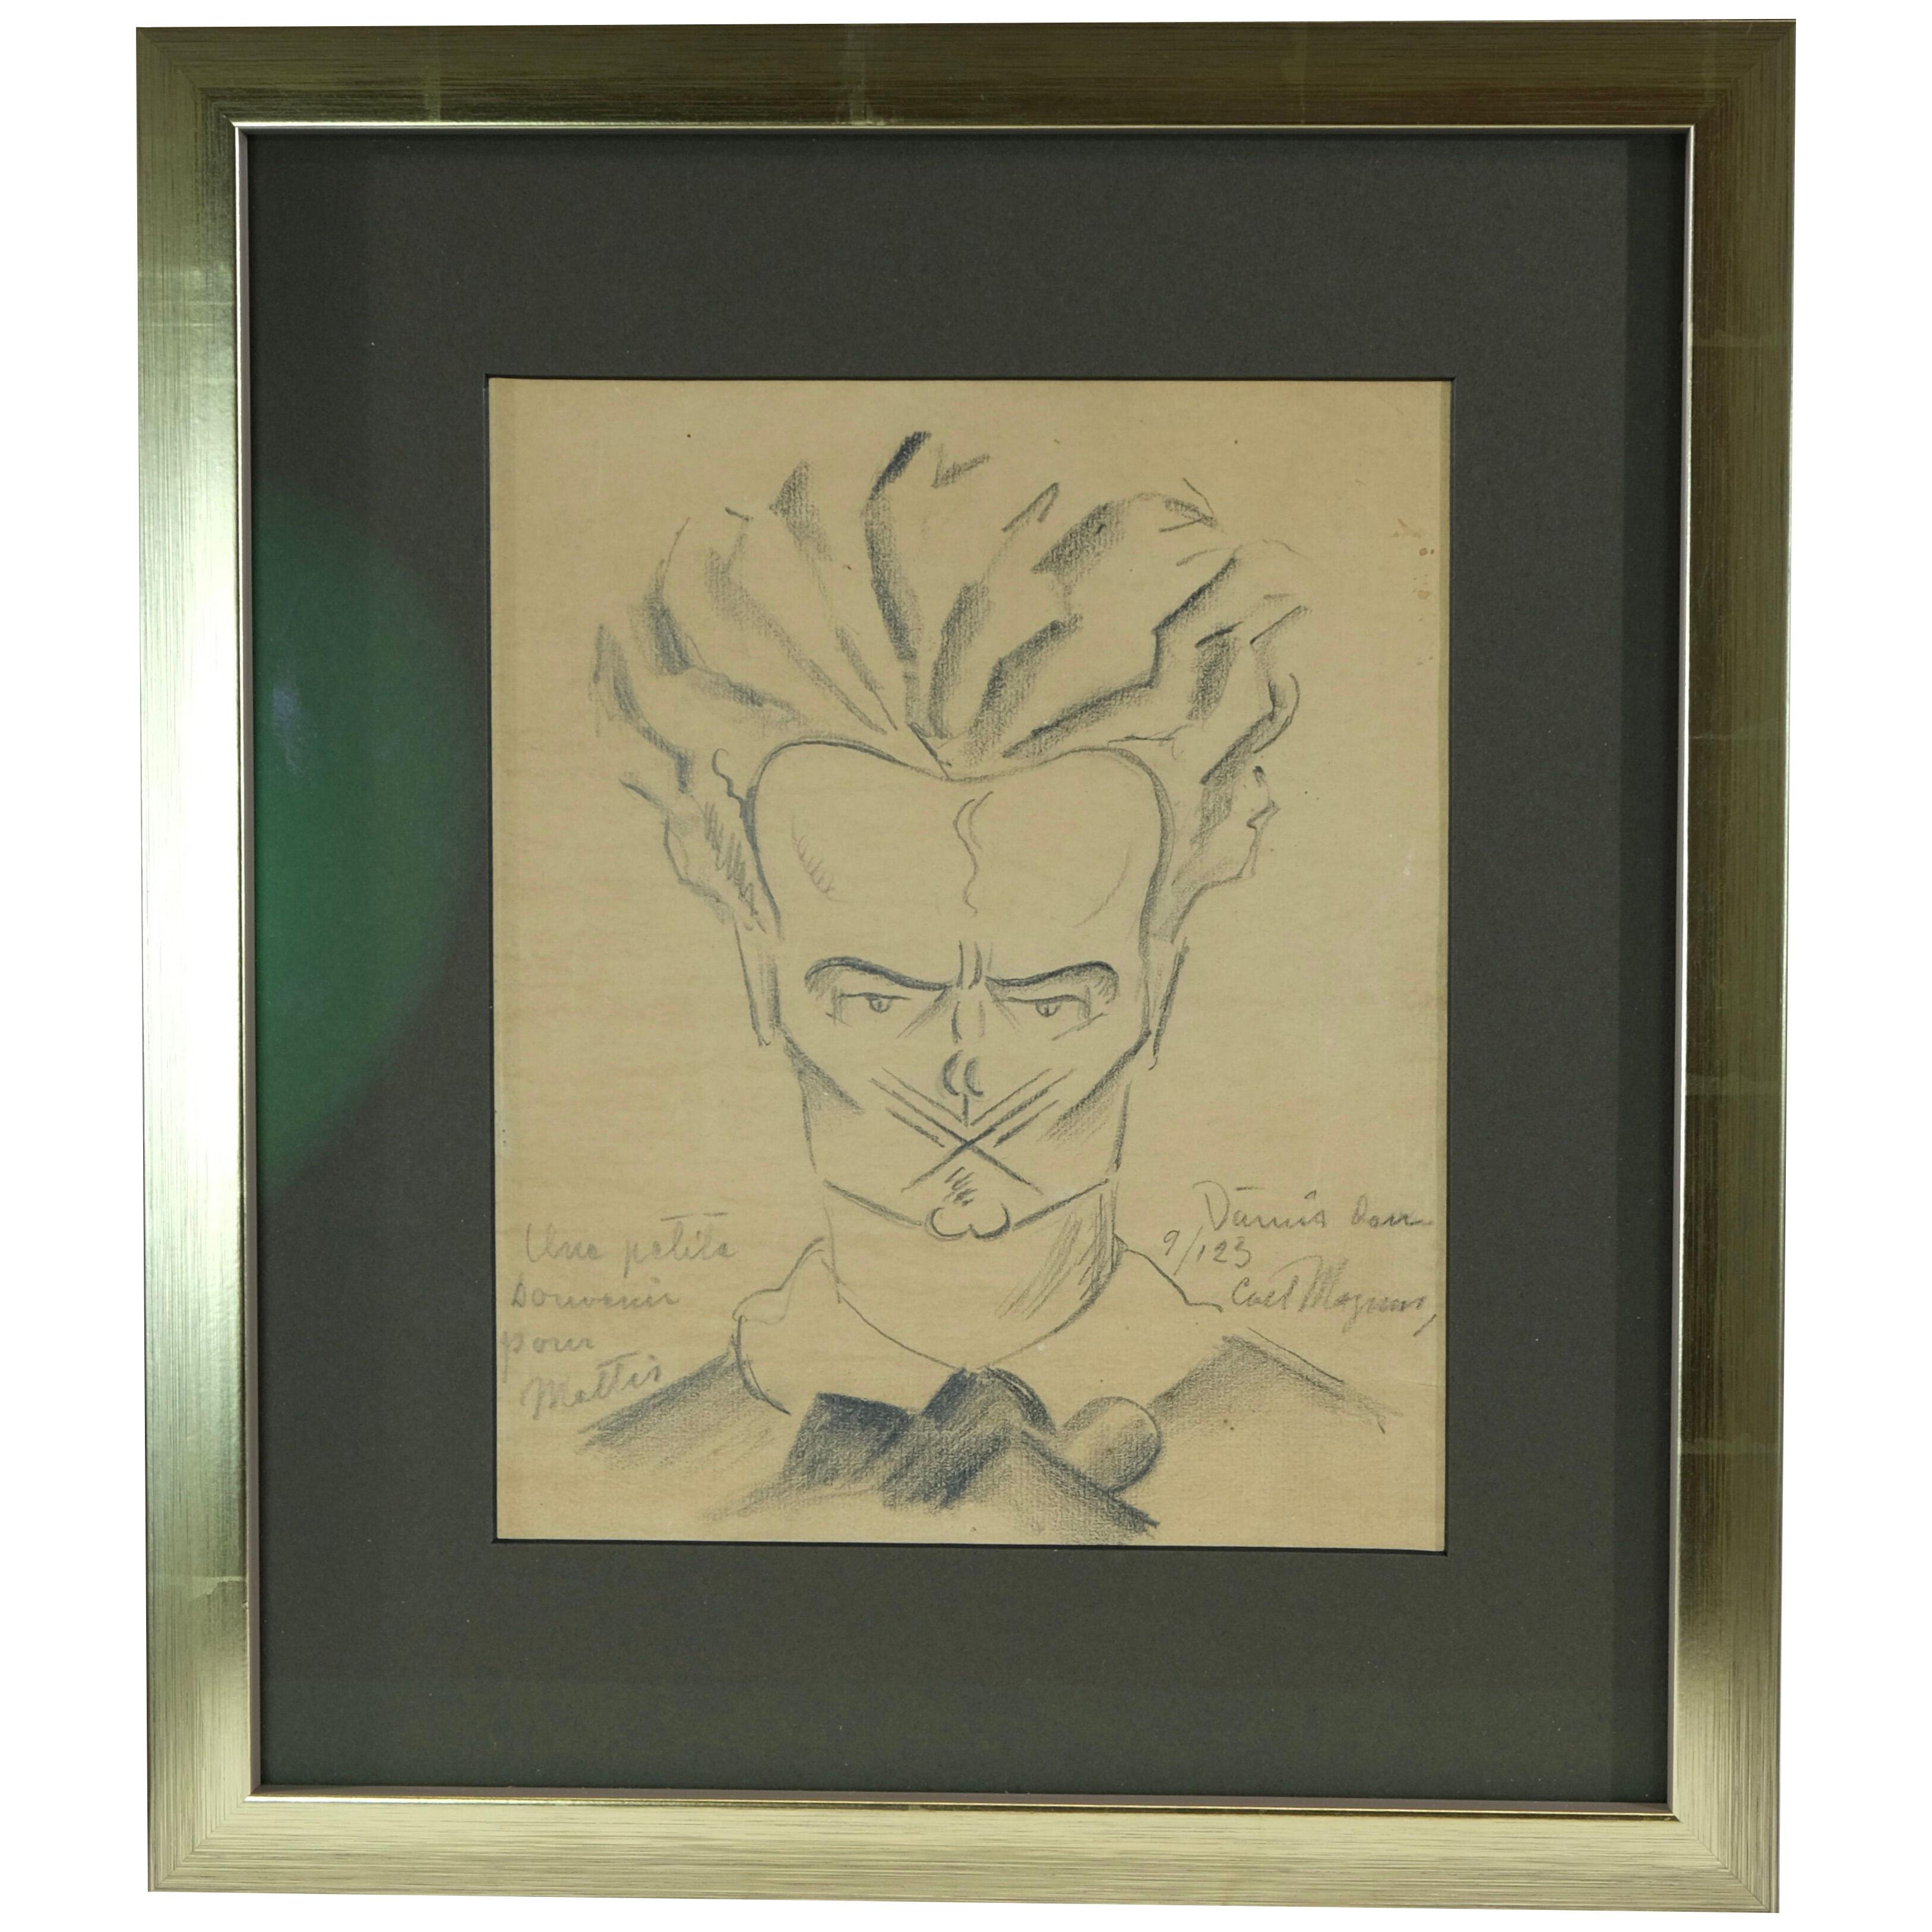 Drawing. Caricature of Augus Strindberg from 1923.